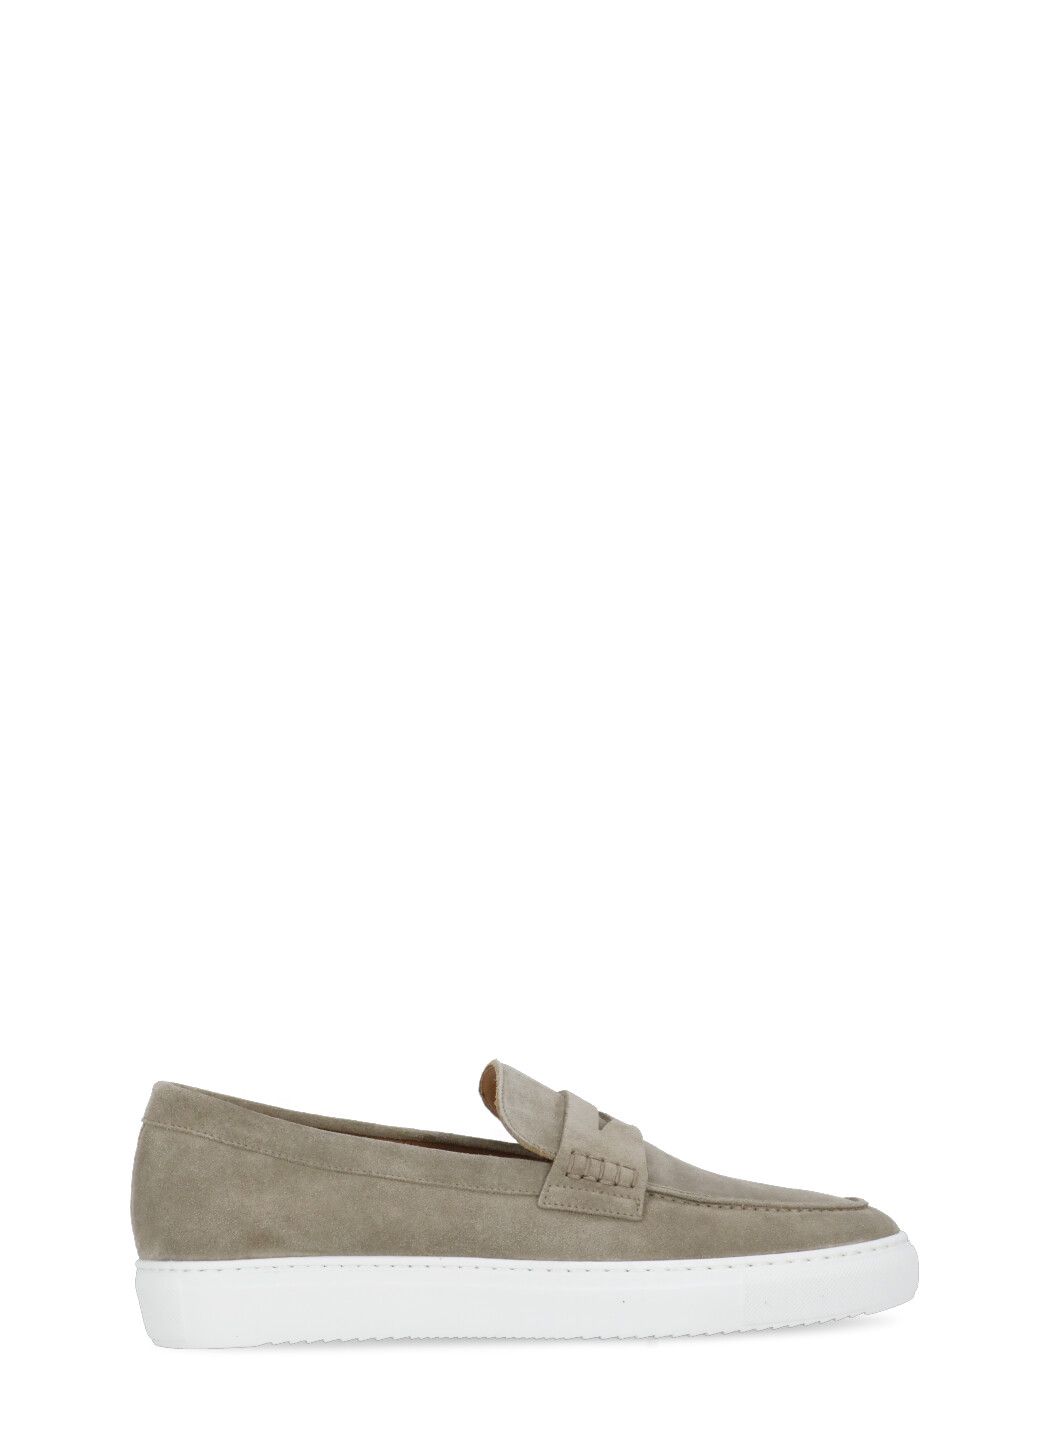 Suede leather loafers